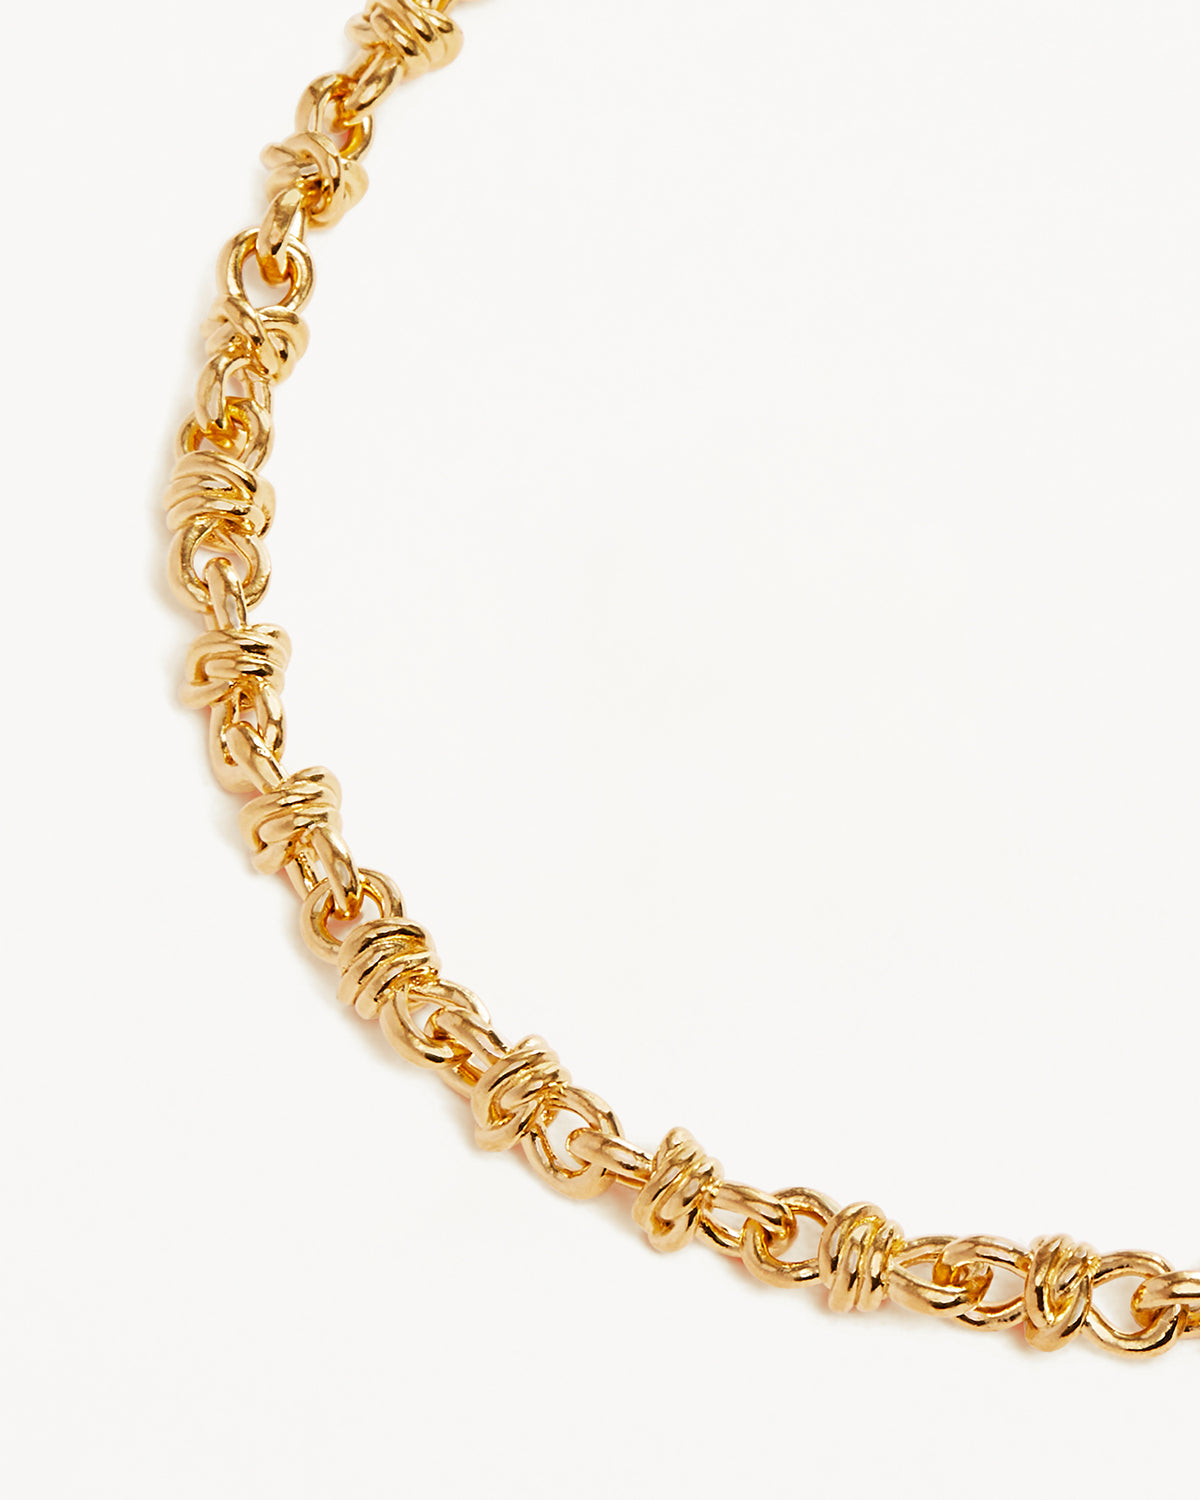 By Charlotte Entwined Bracelet, Gold